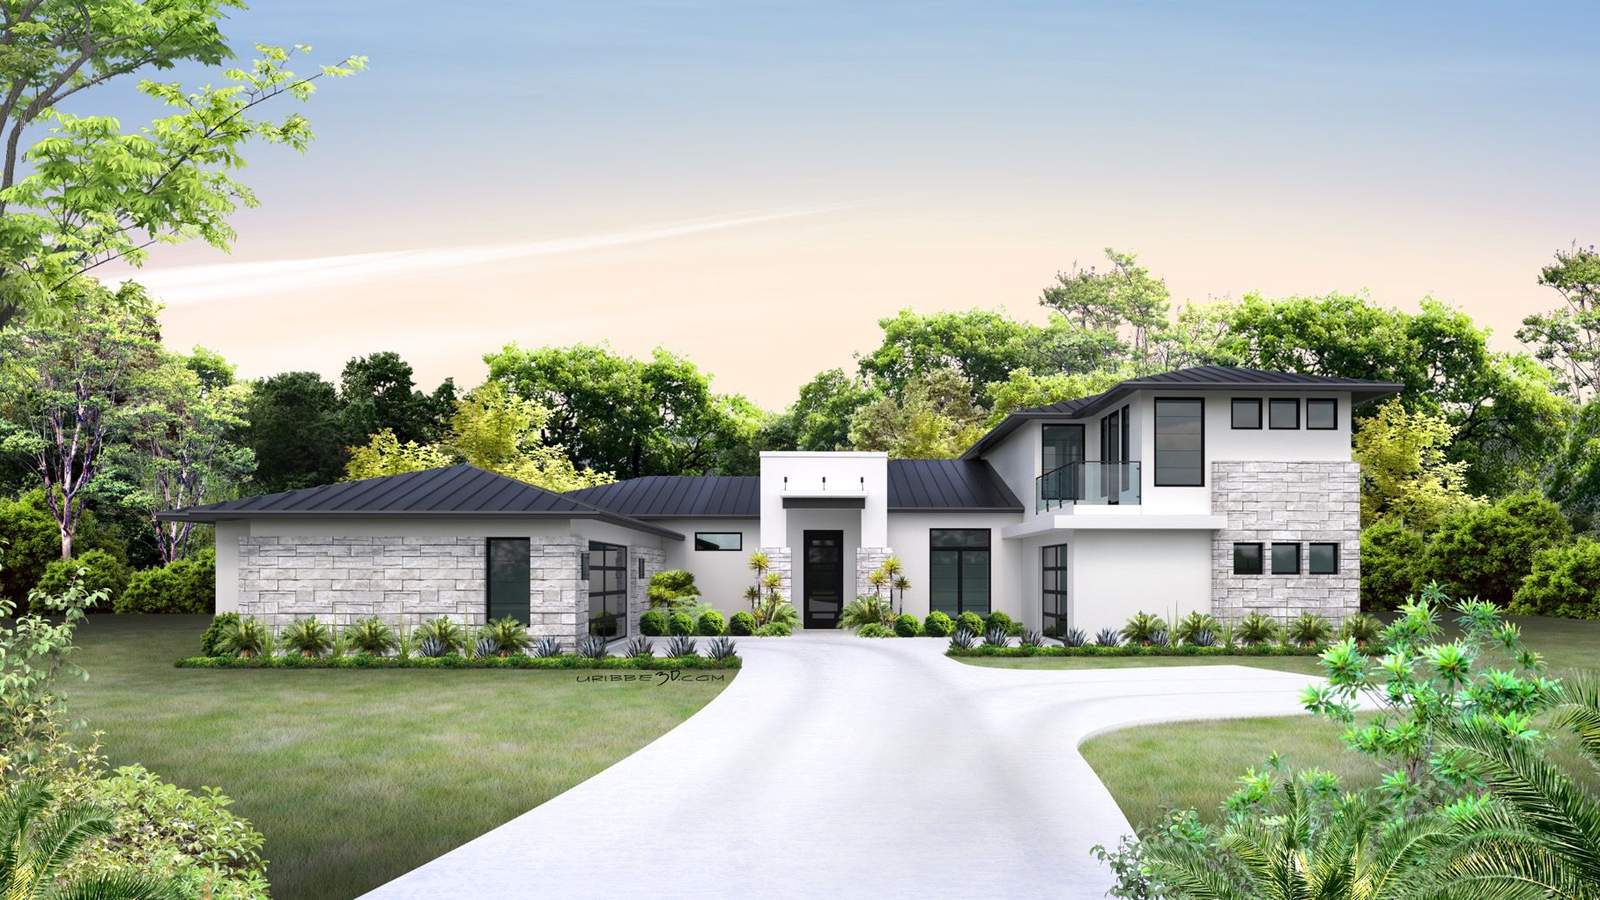 Real estate shopping? Have you considered this new scenic Texas Hill Country neighborhood?